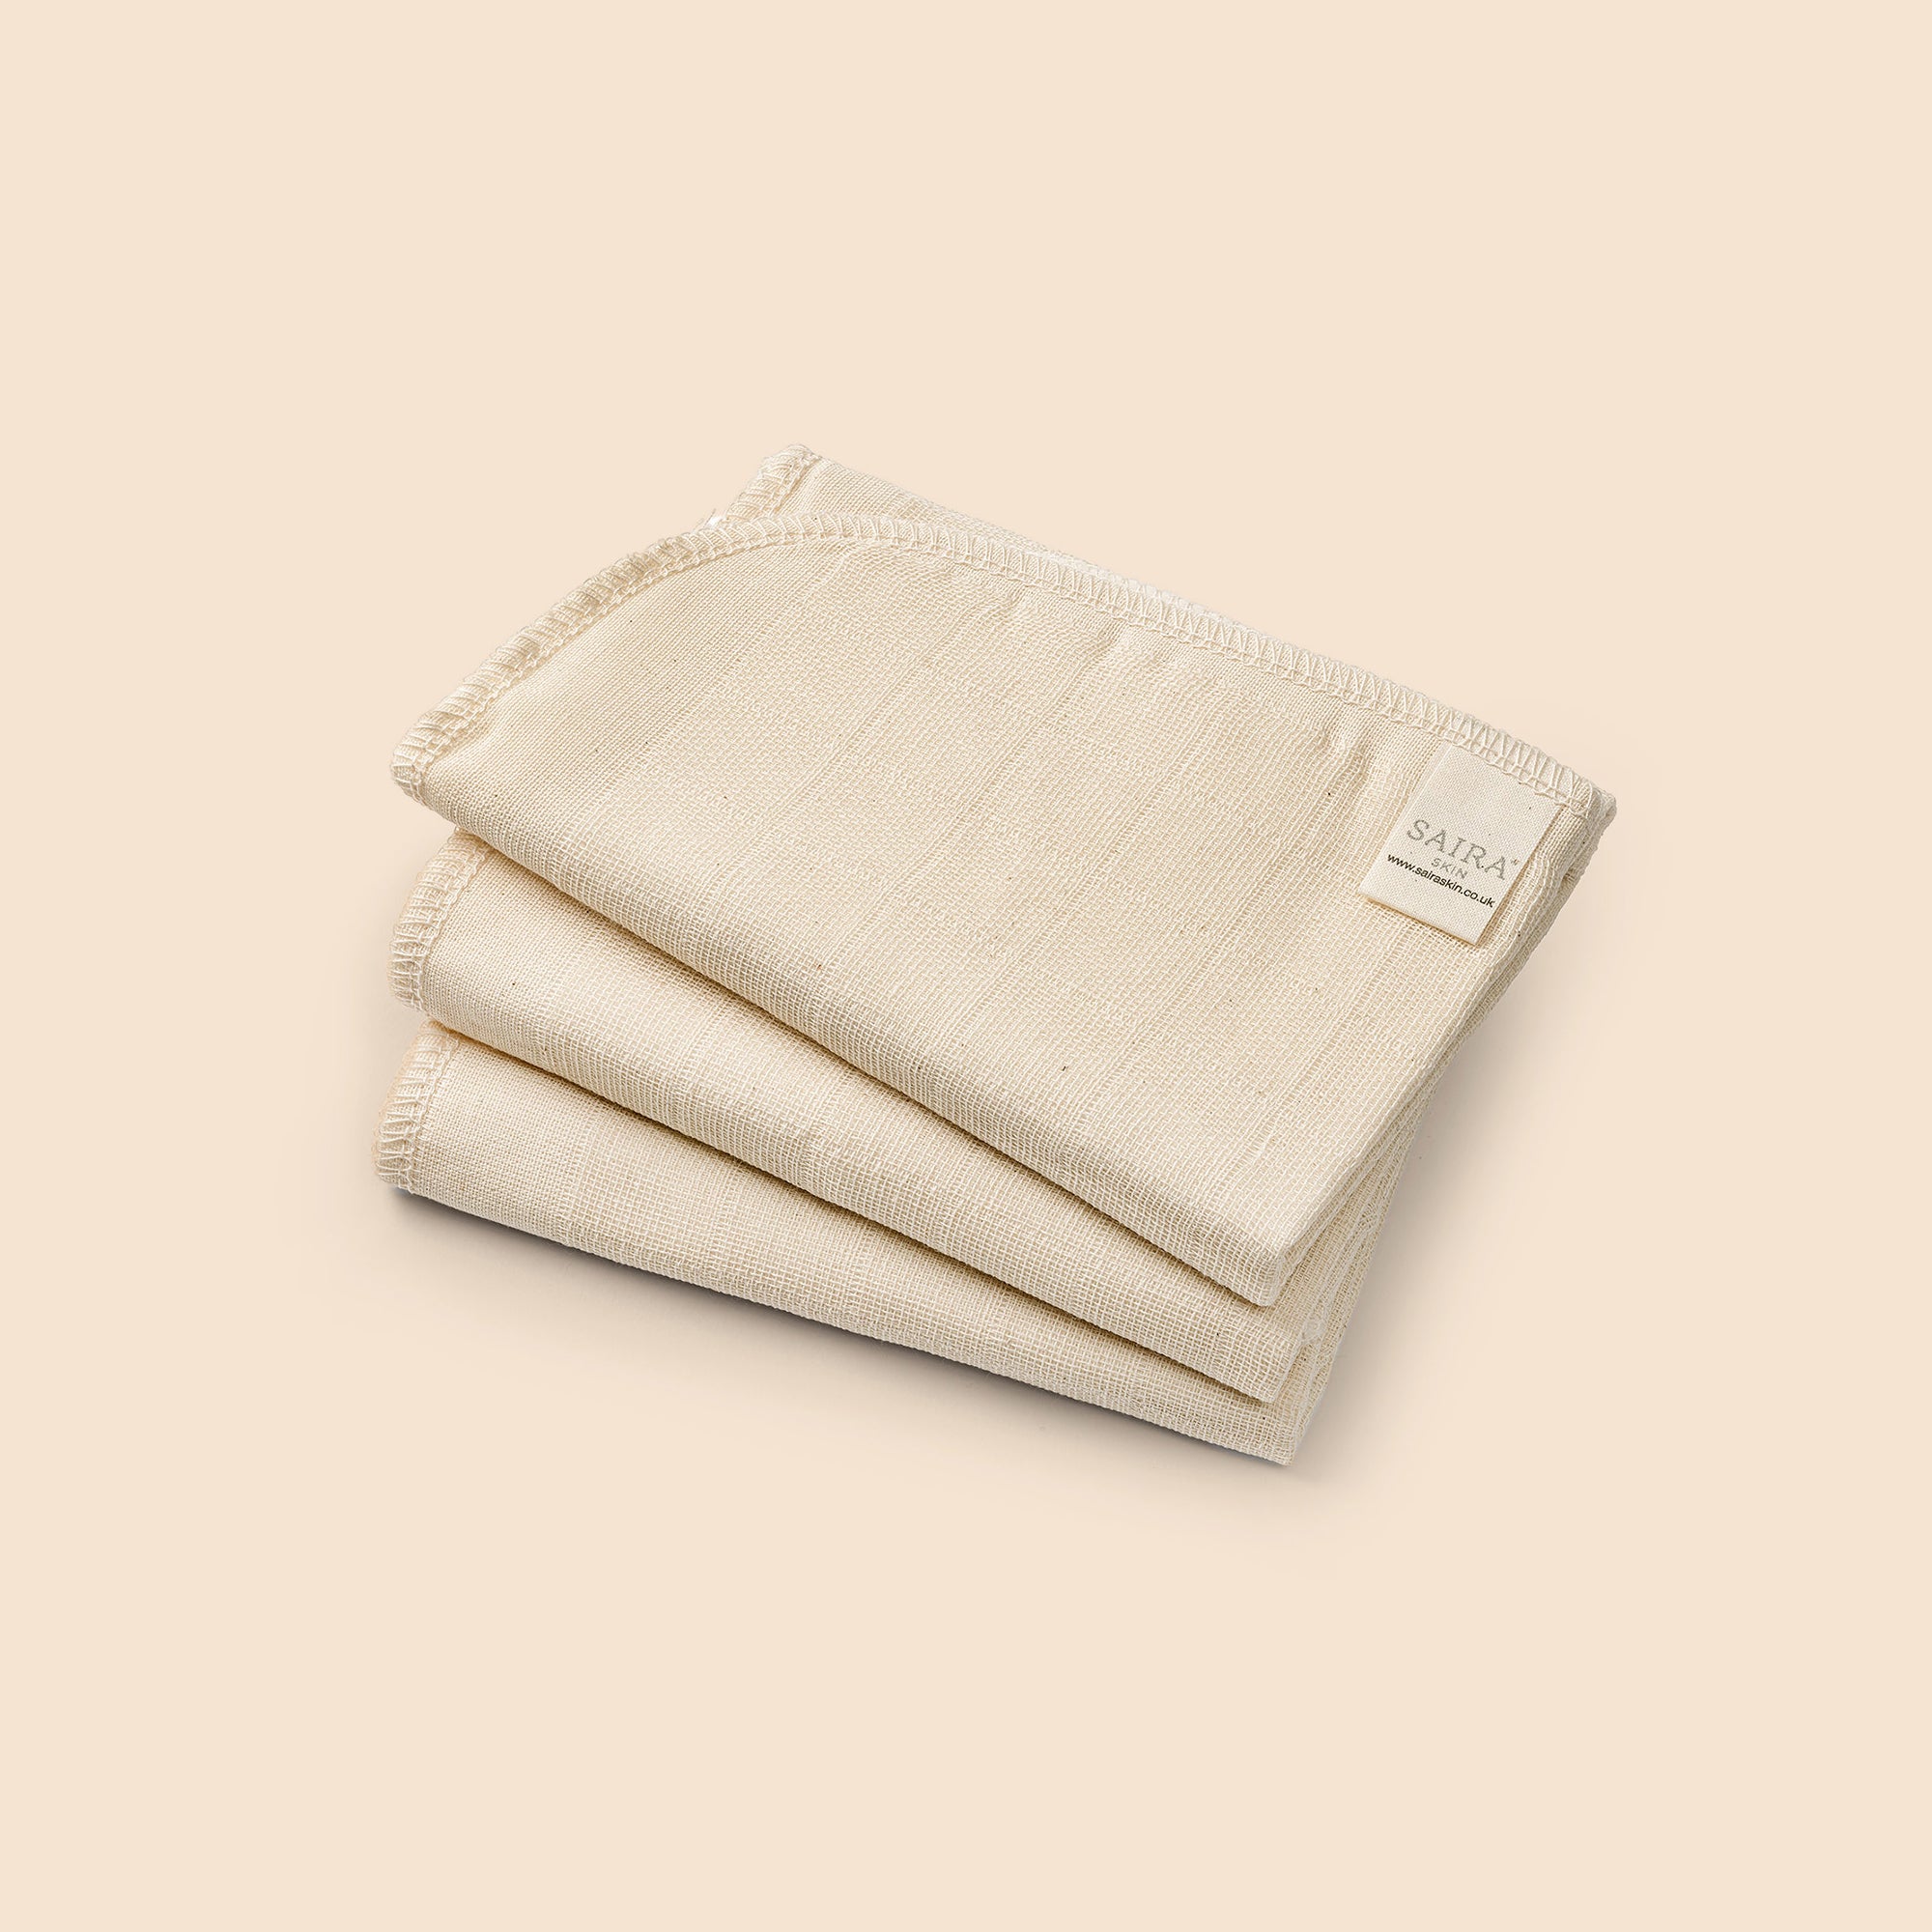 New Mothers are Choosing Muslin Fabric for Babies